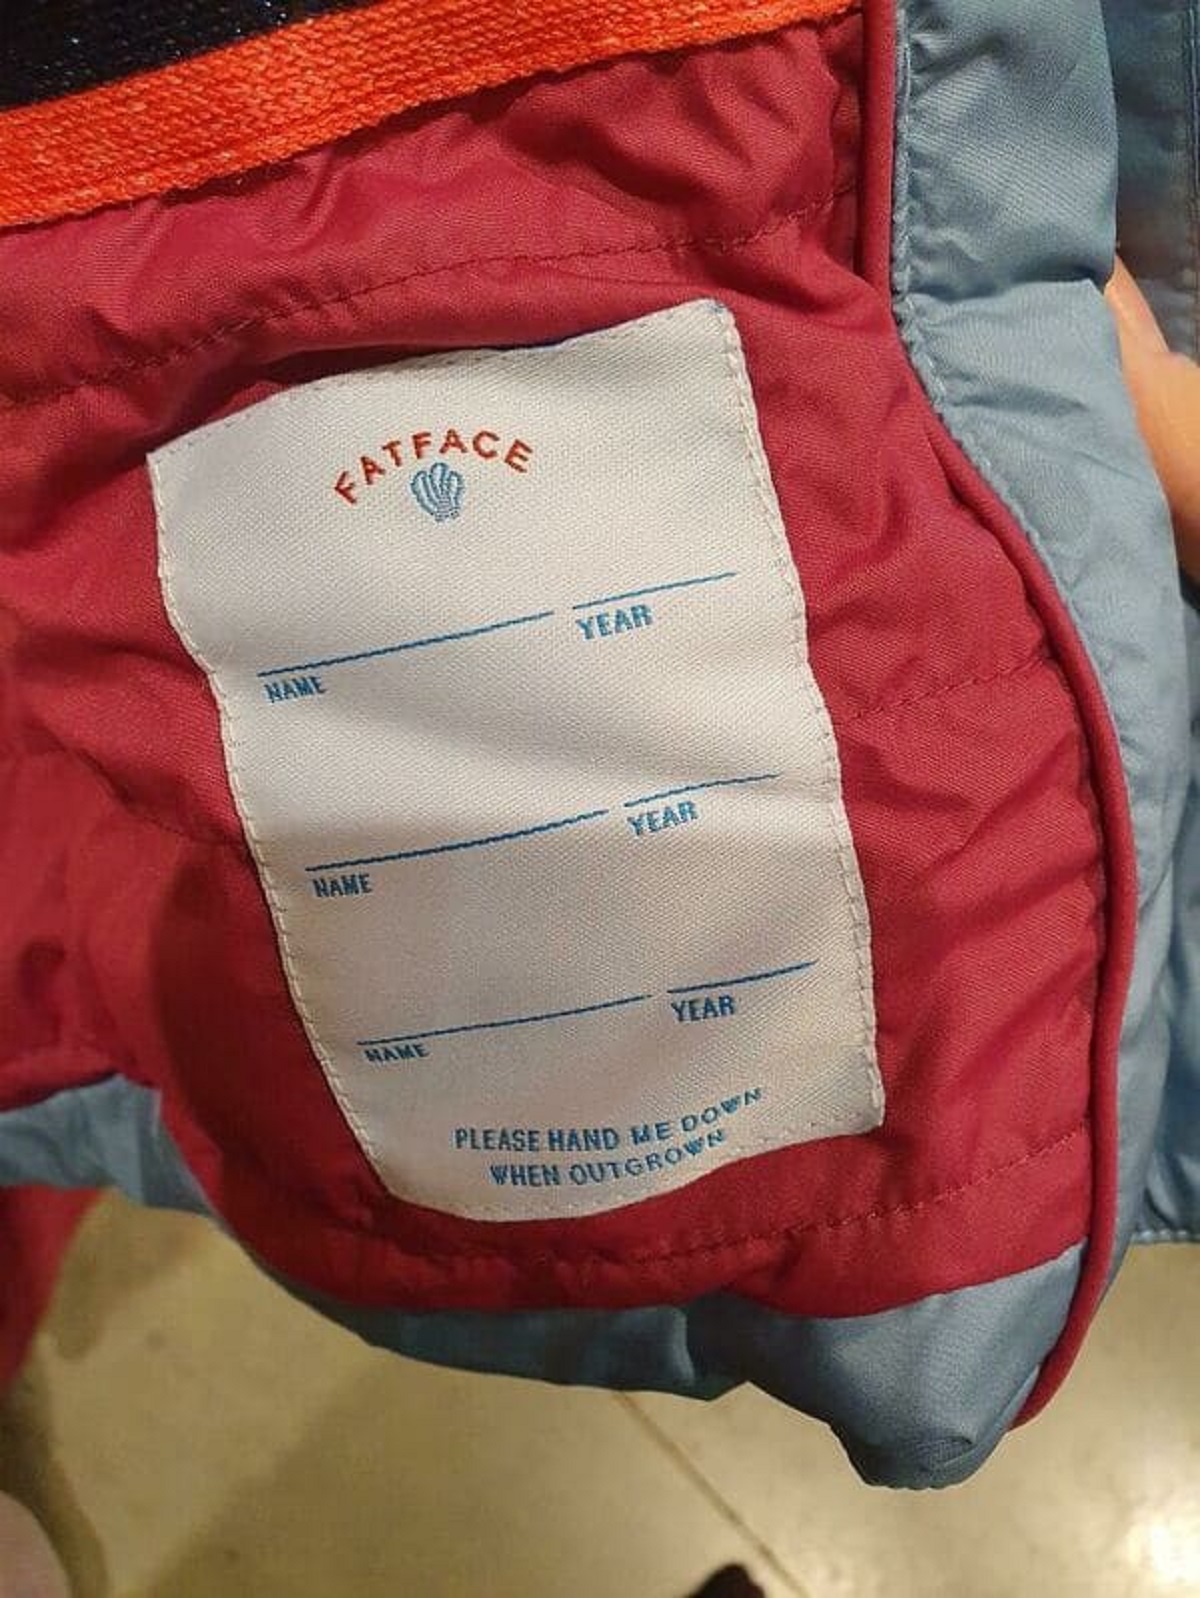 “Clothes Company Puts Options For Multiple Owners On Children's Coats”